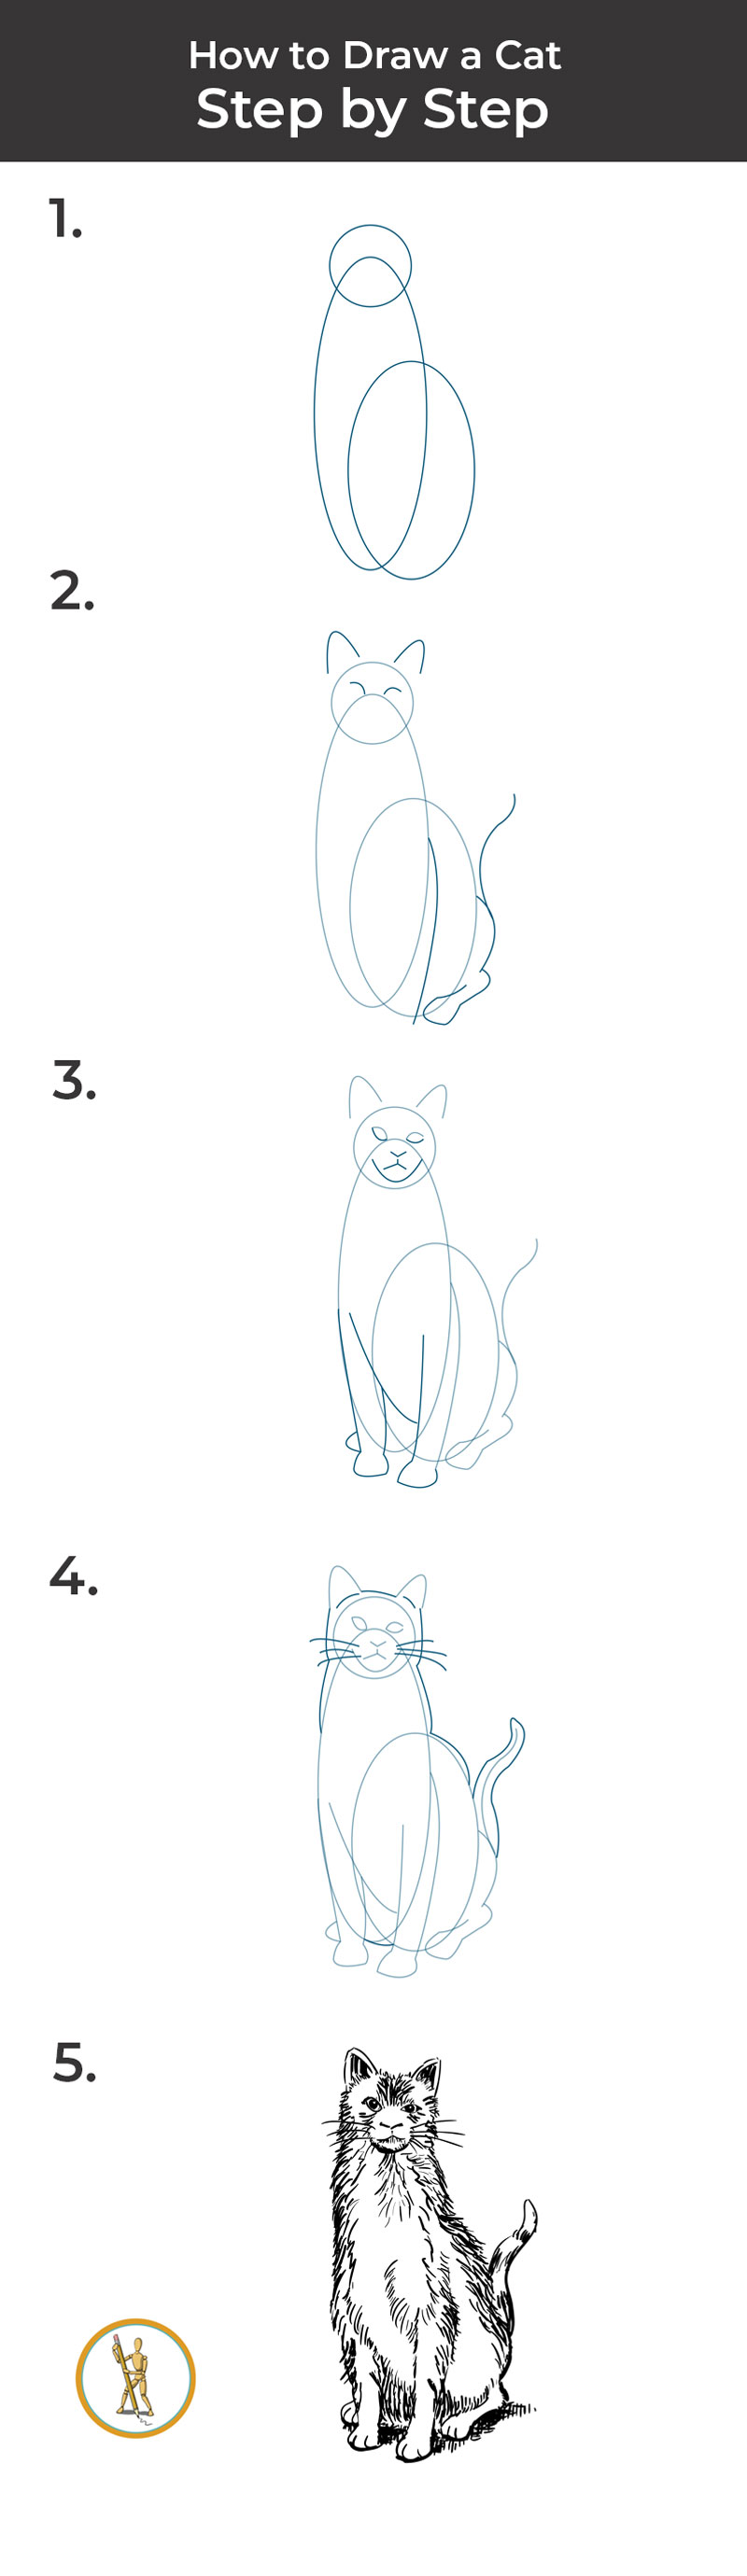 How to Draw a Realistic Cat